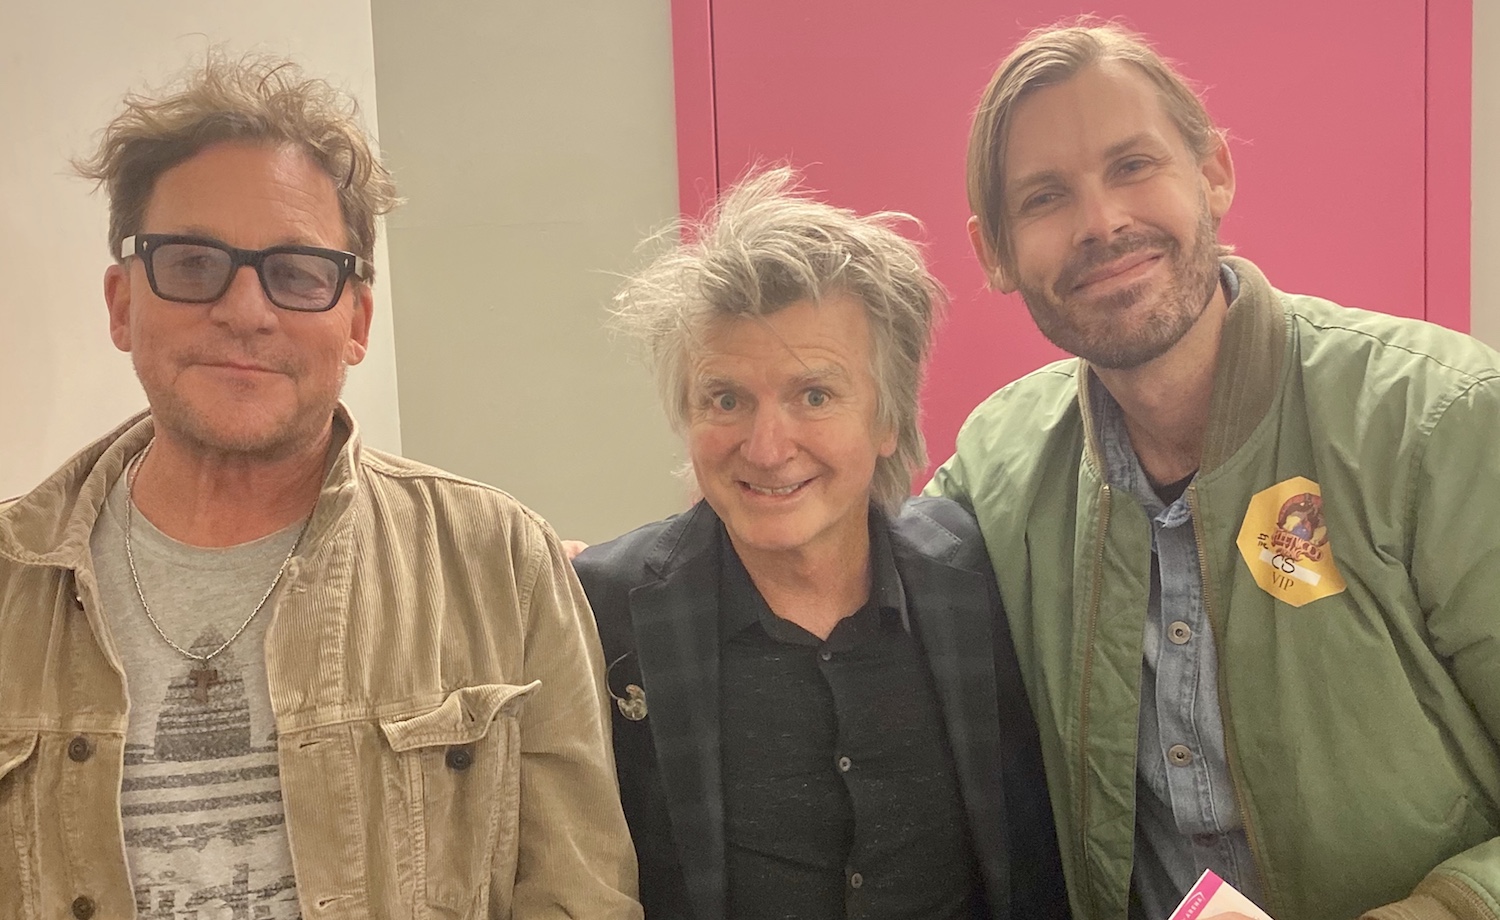 BMG signs Neil Finn to exclusive global publishing deal